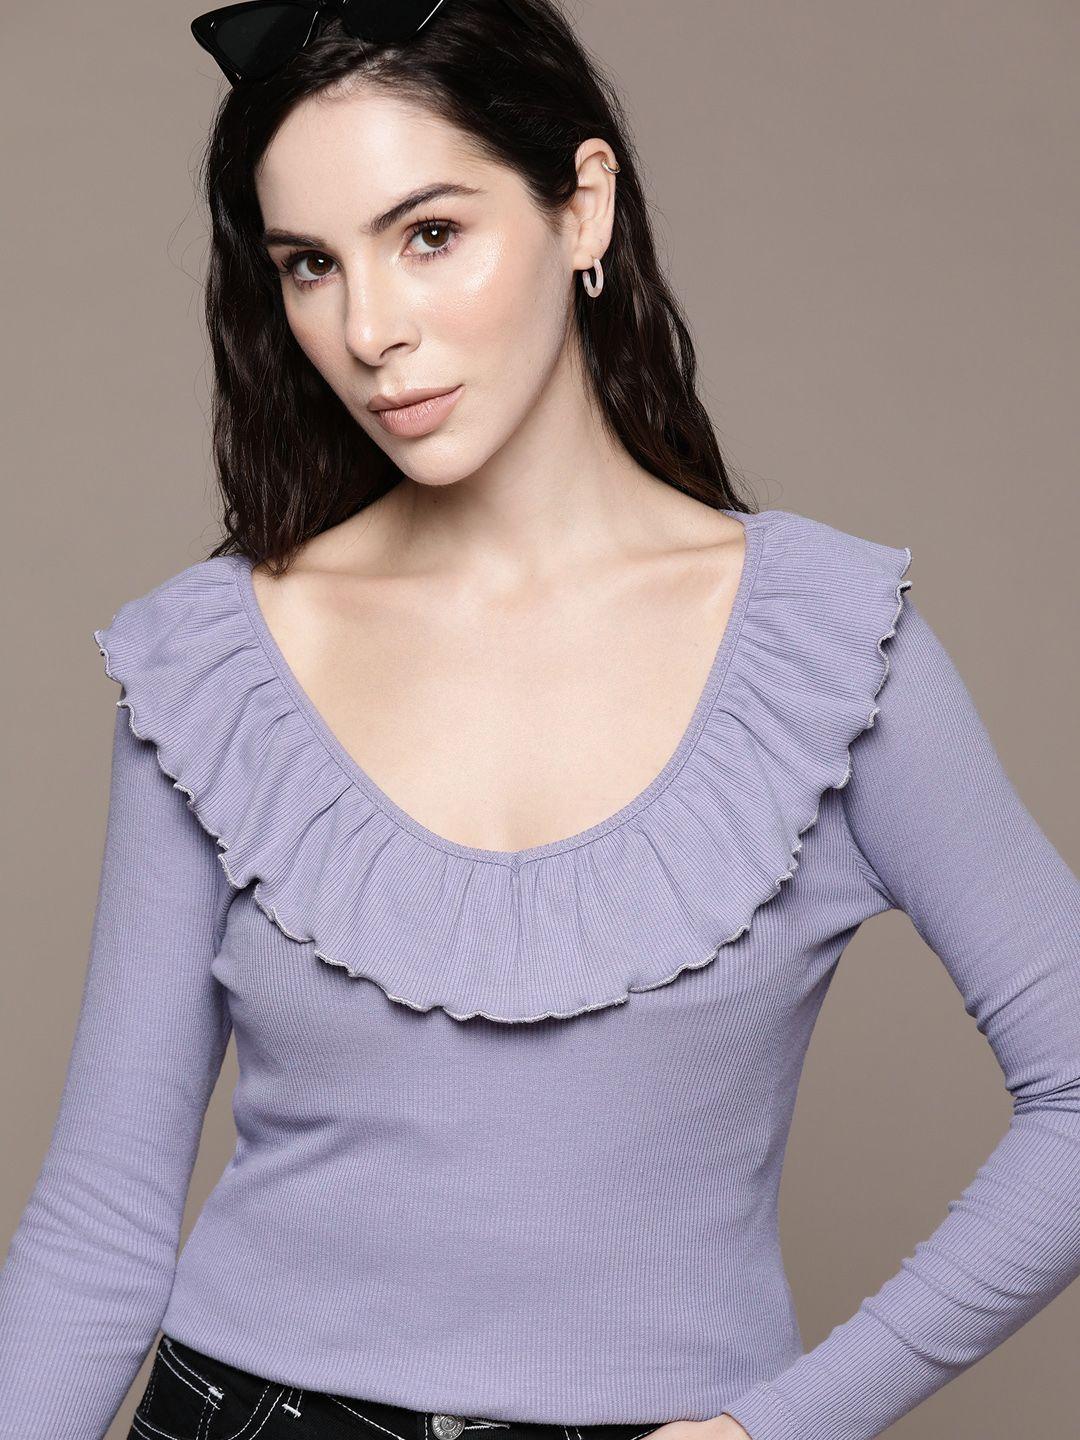 the roadster lifestyle co. ruffles top